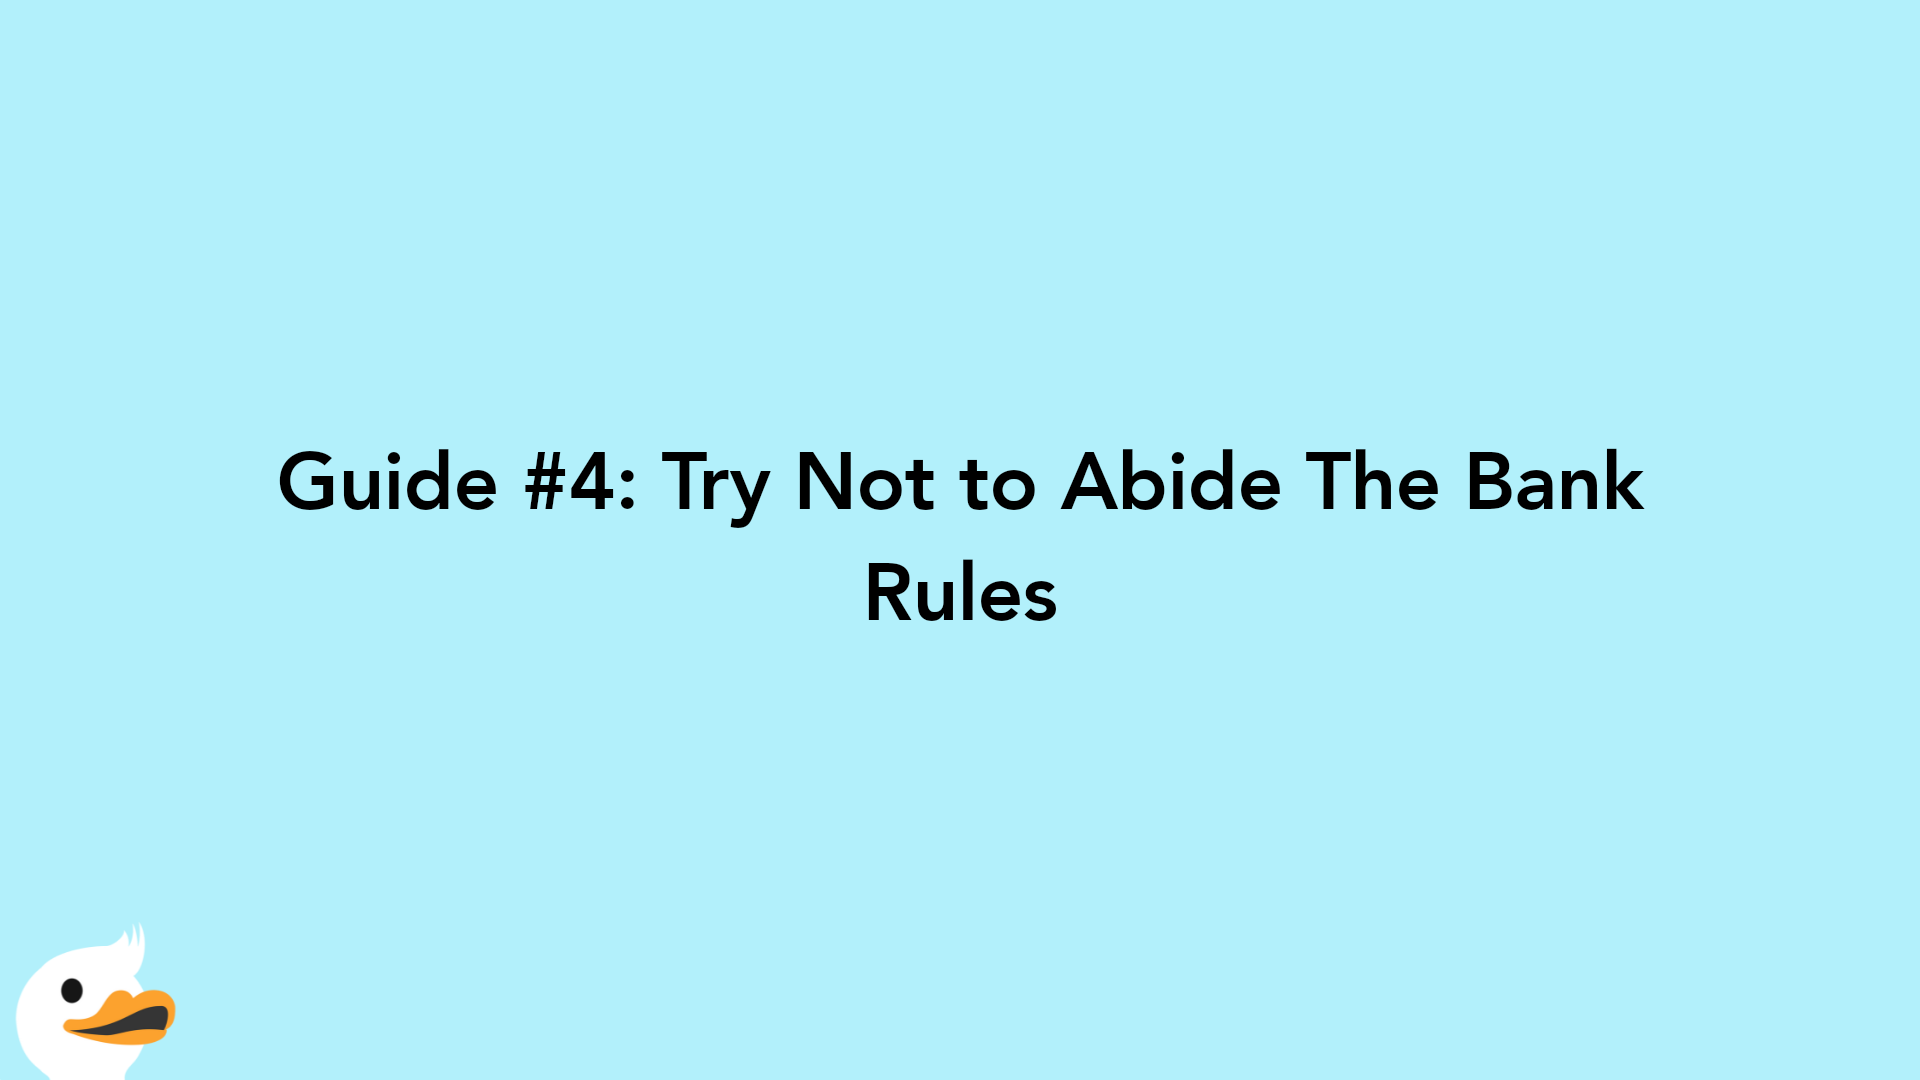 Guide #4: Try Not to Abide The Bank Rules